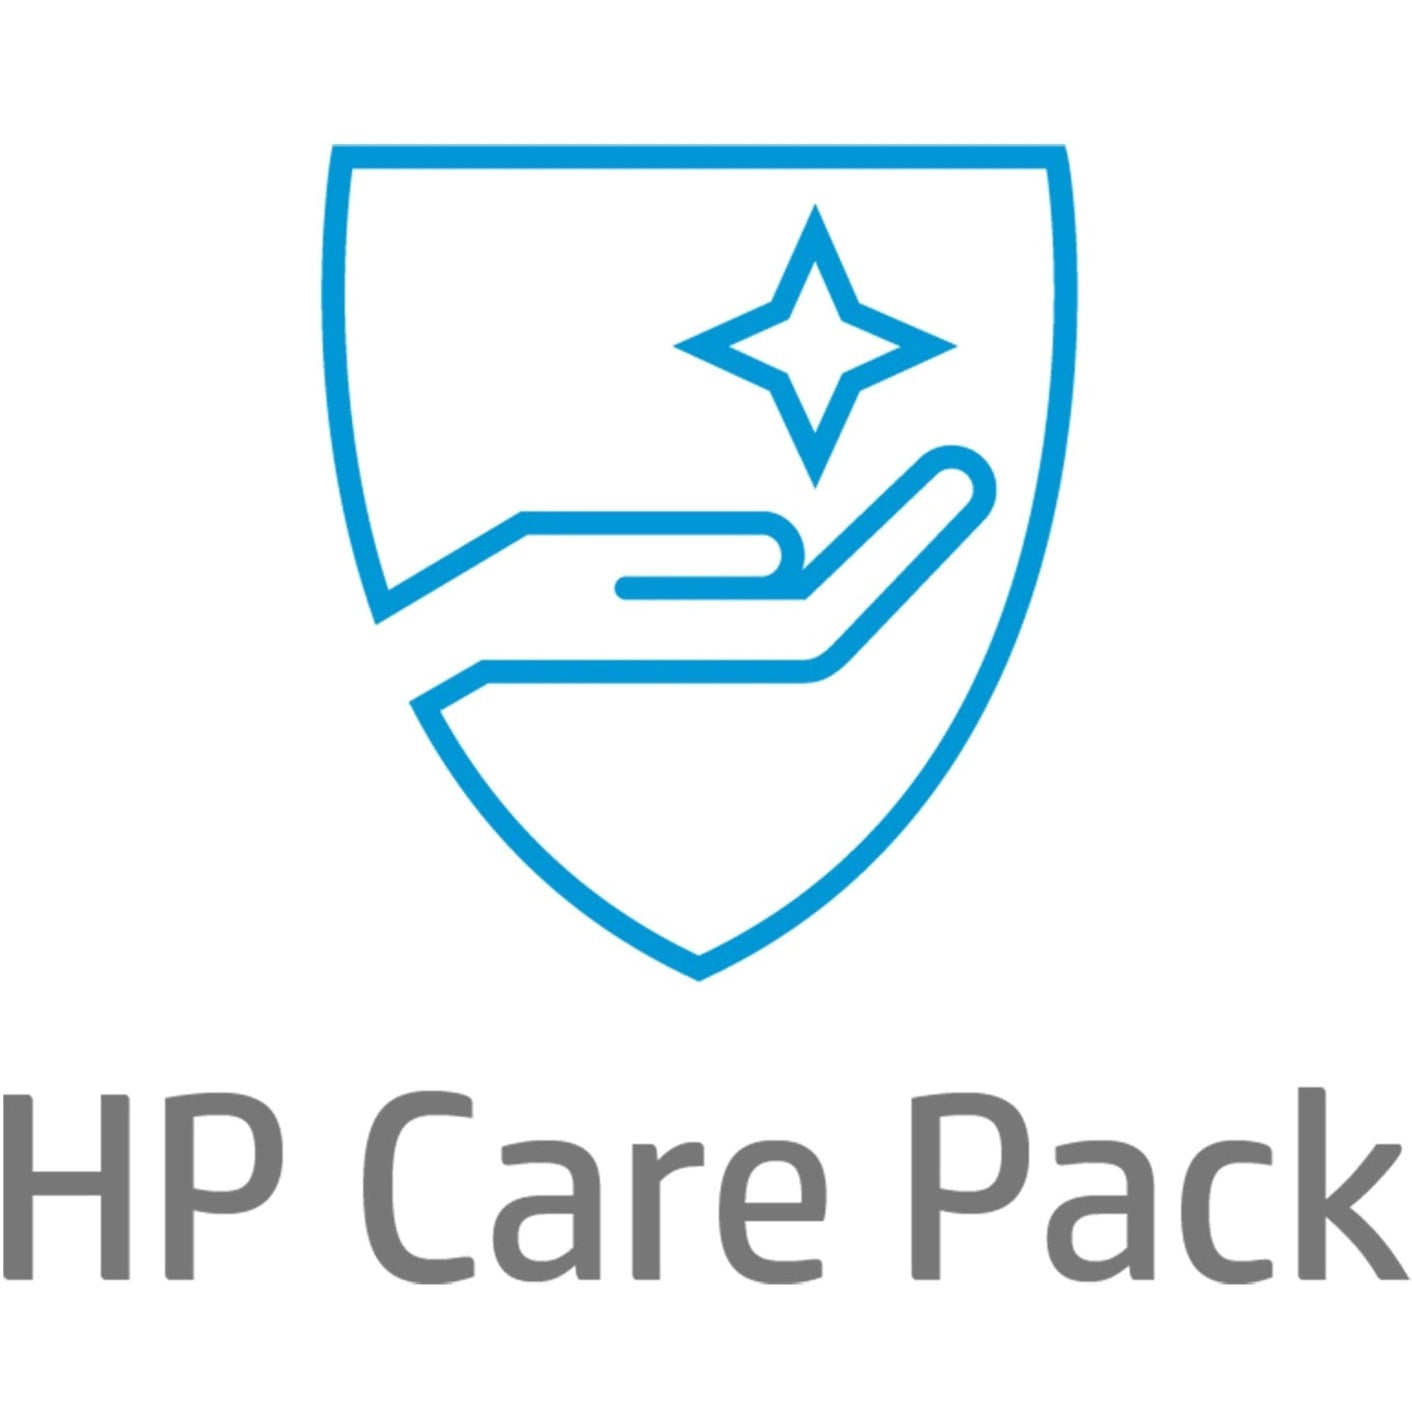 HP Care Pack - Extended Warranty - 5 Year - Warranty (UB0F2E)